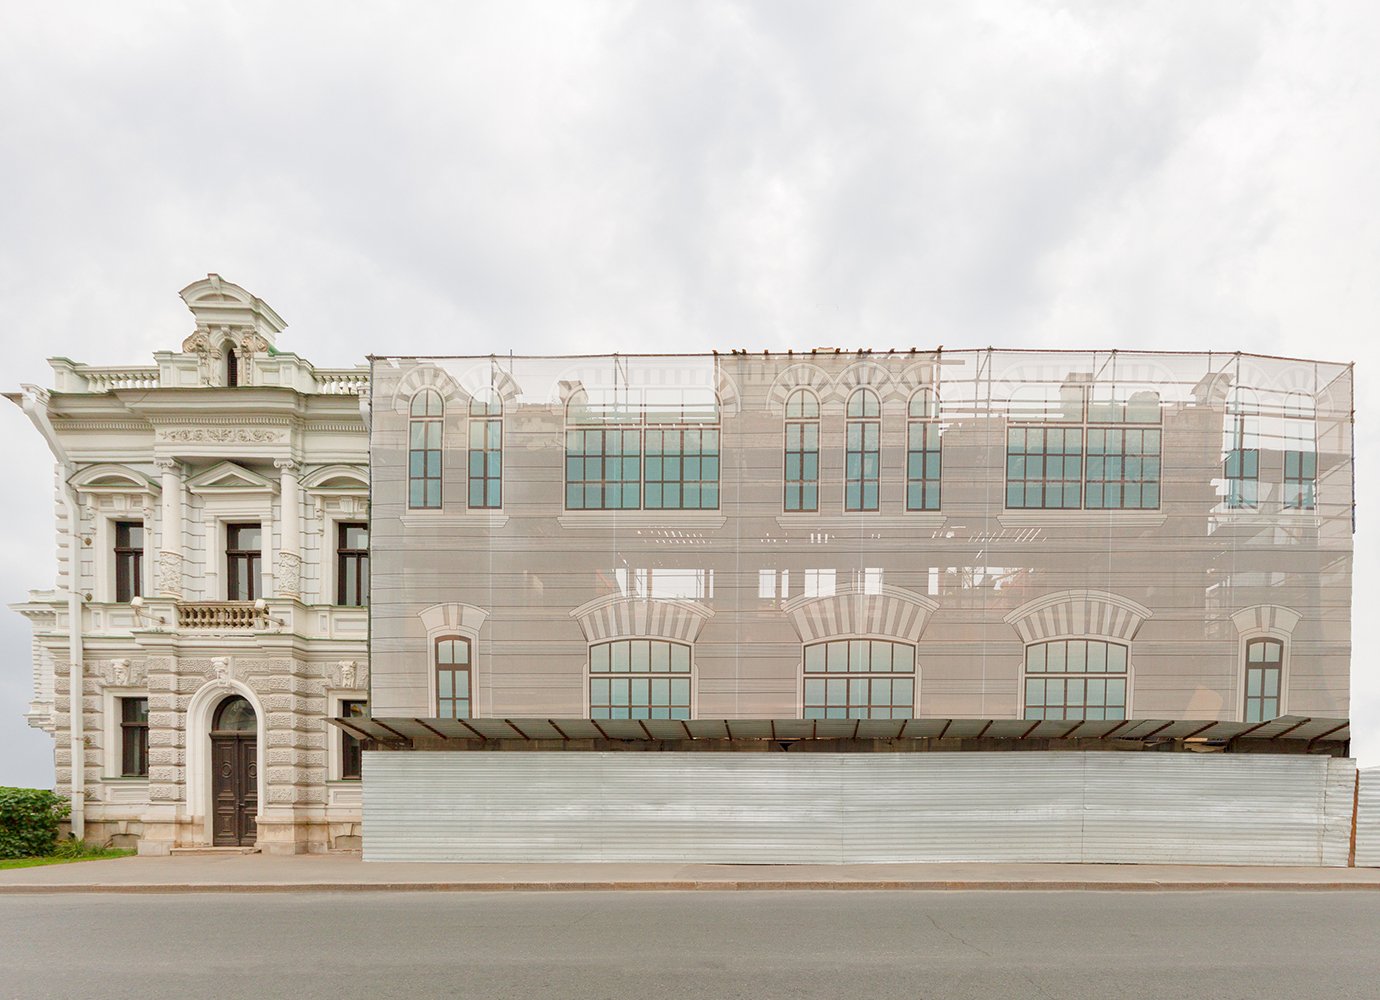 Kunststück: the real stories behind Russia’s fake facades